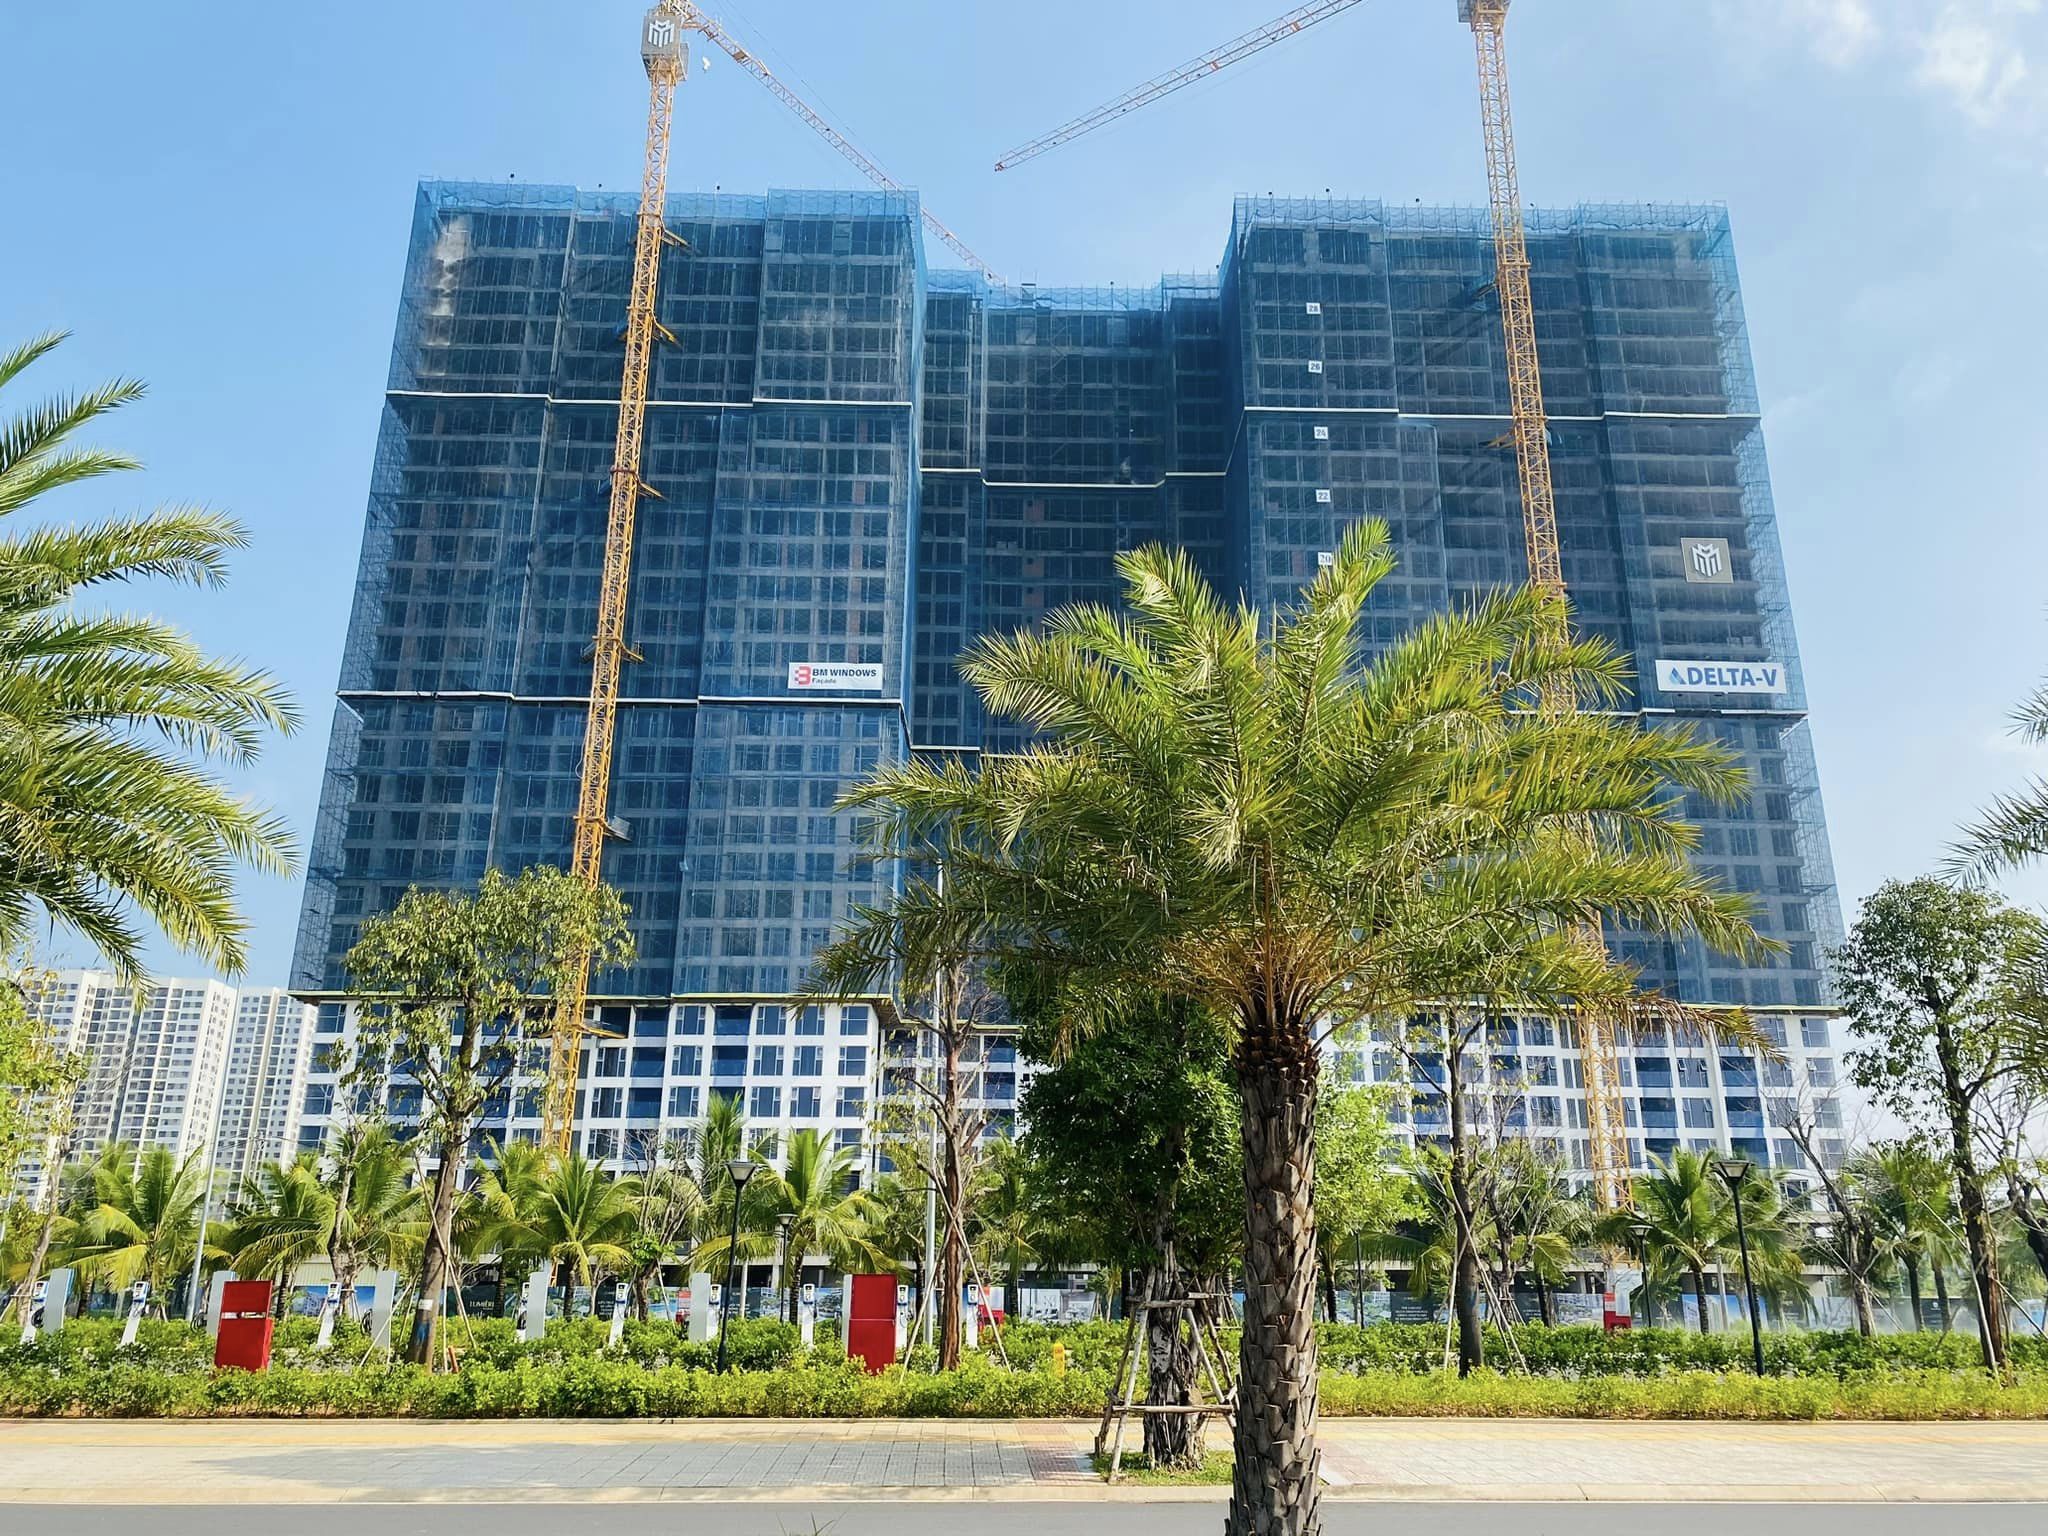 Update the progress of the luxury apartment project Lumiere Boulevard of Masterise Group, located in Vinhomes Central Park urban area, Thu Duc City, Ho Chi Minh City in February 2023.